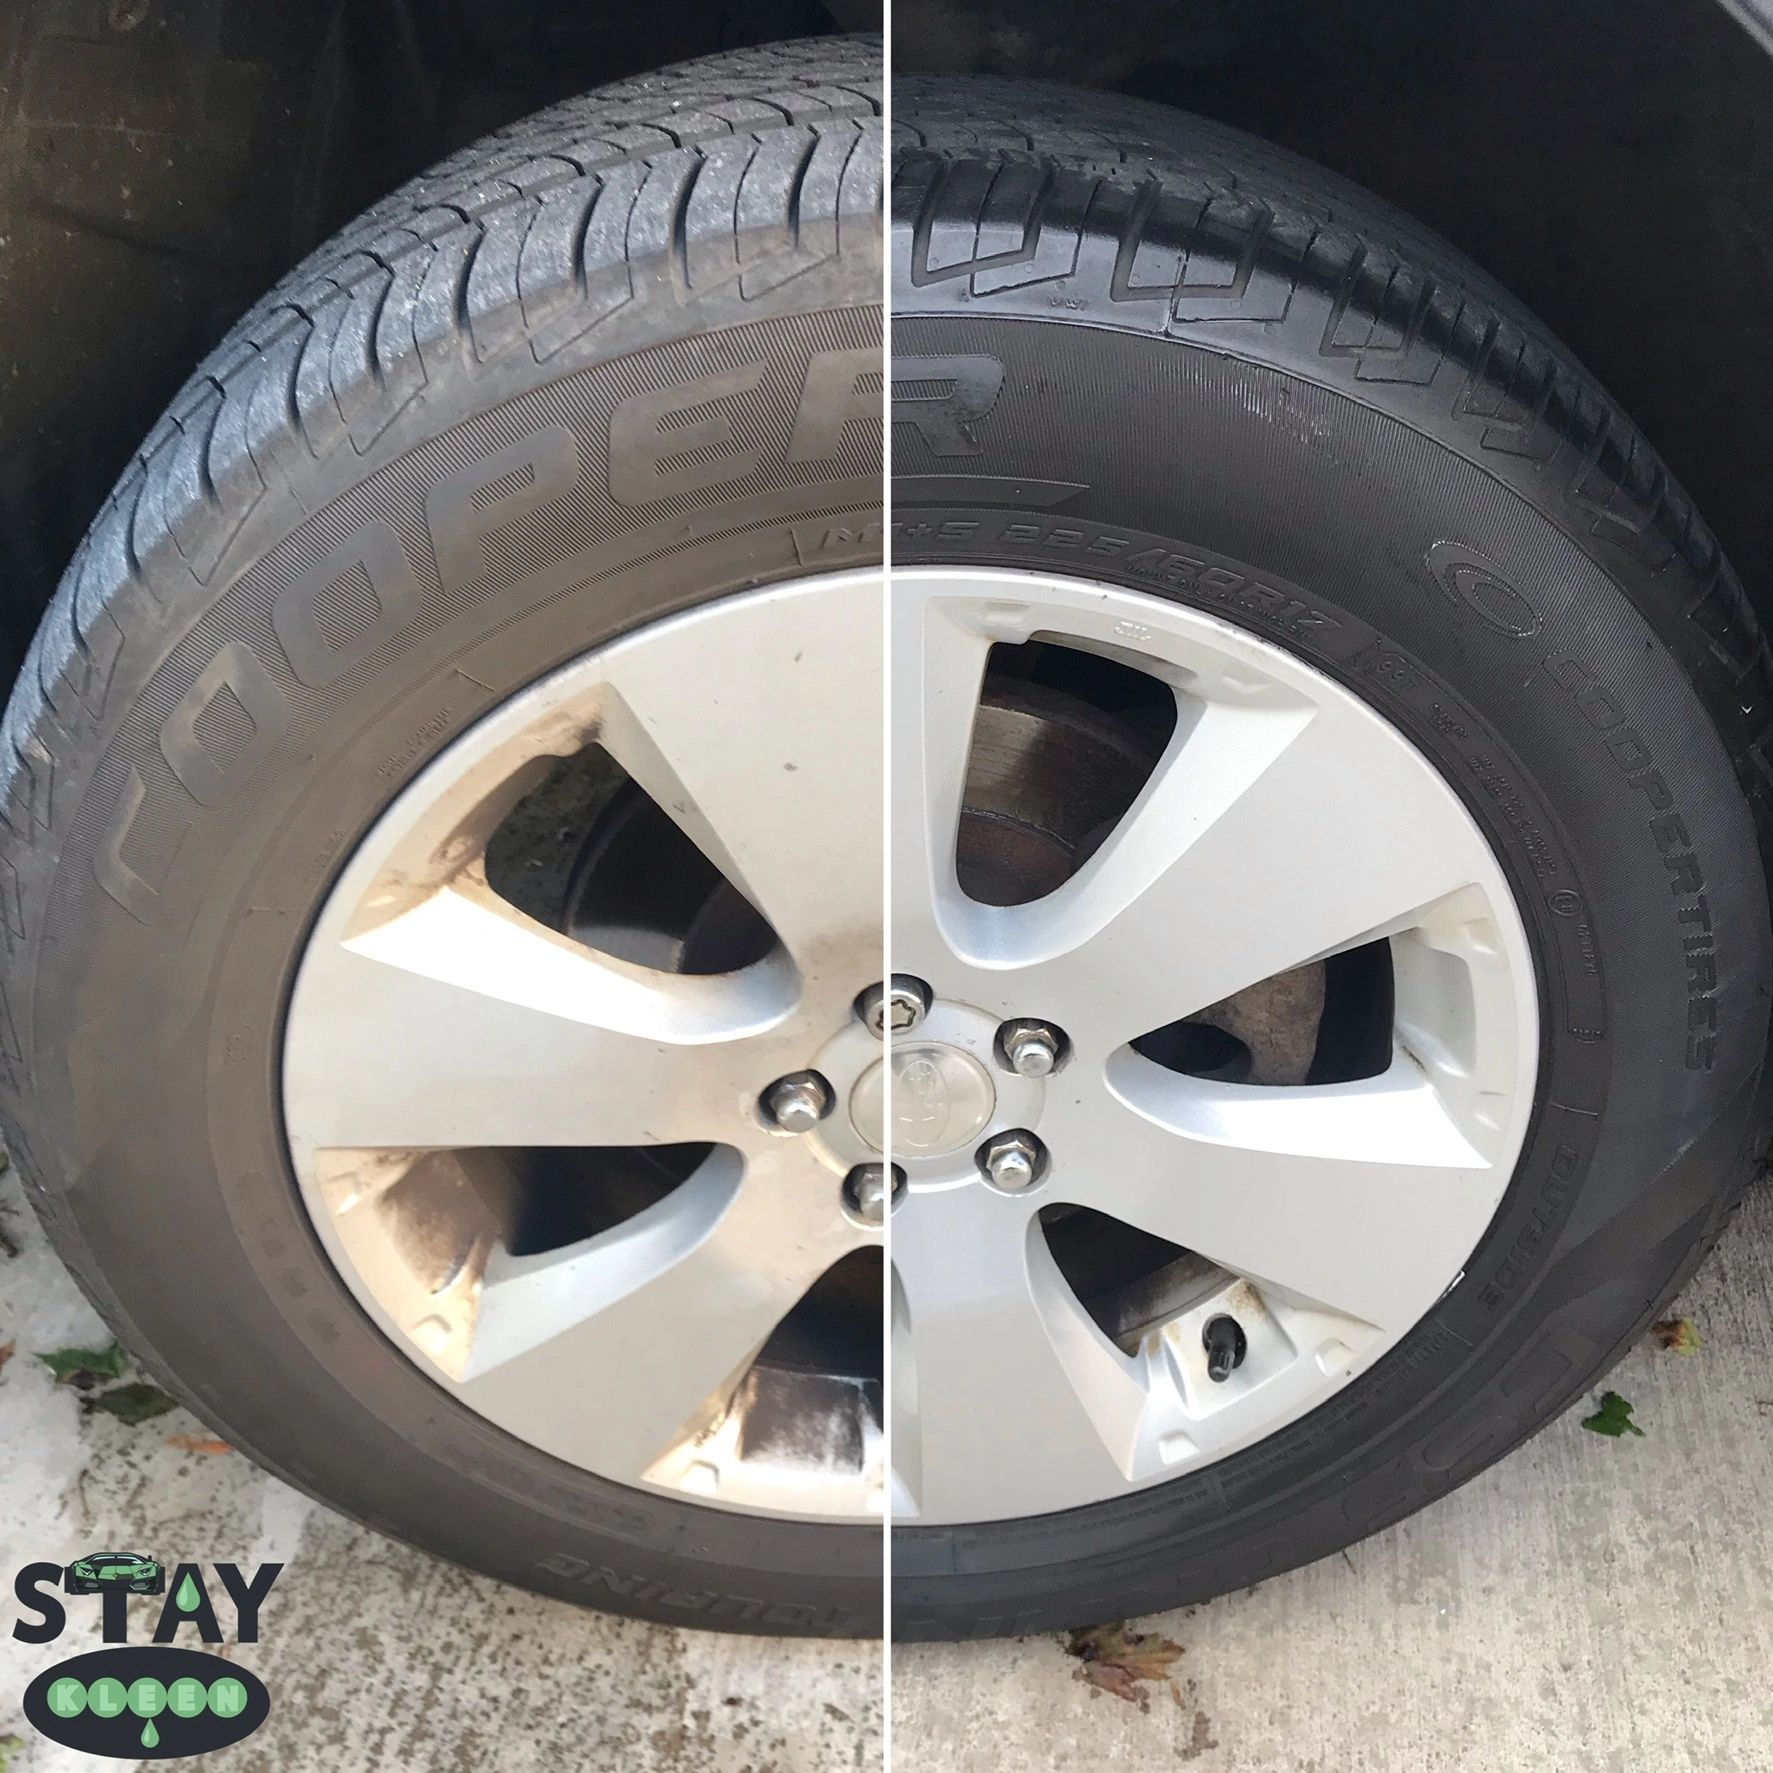 Subaru Outback Before & After wheel and tire cleaned